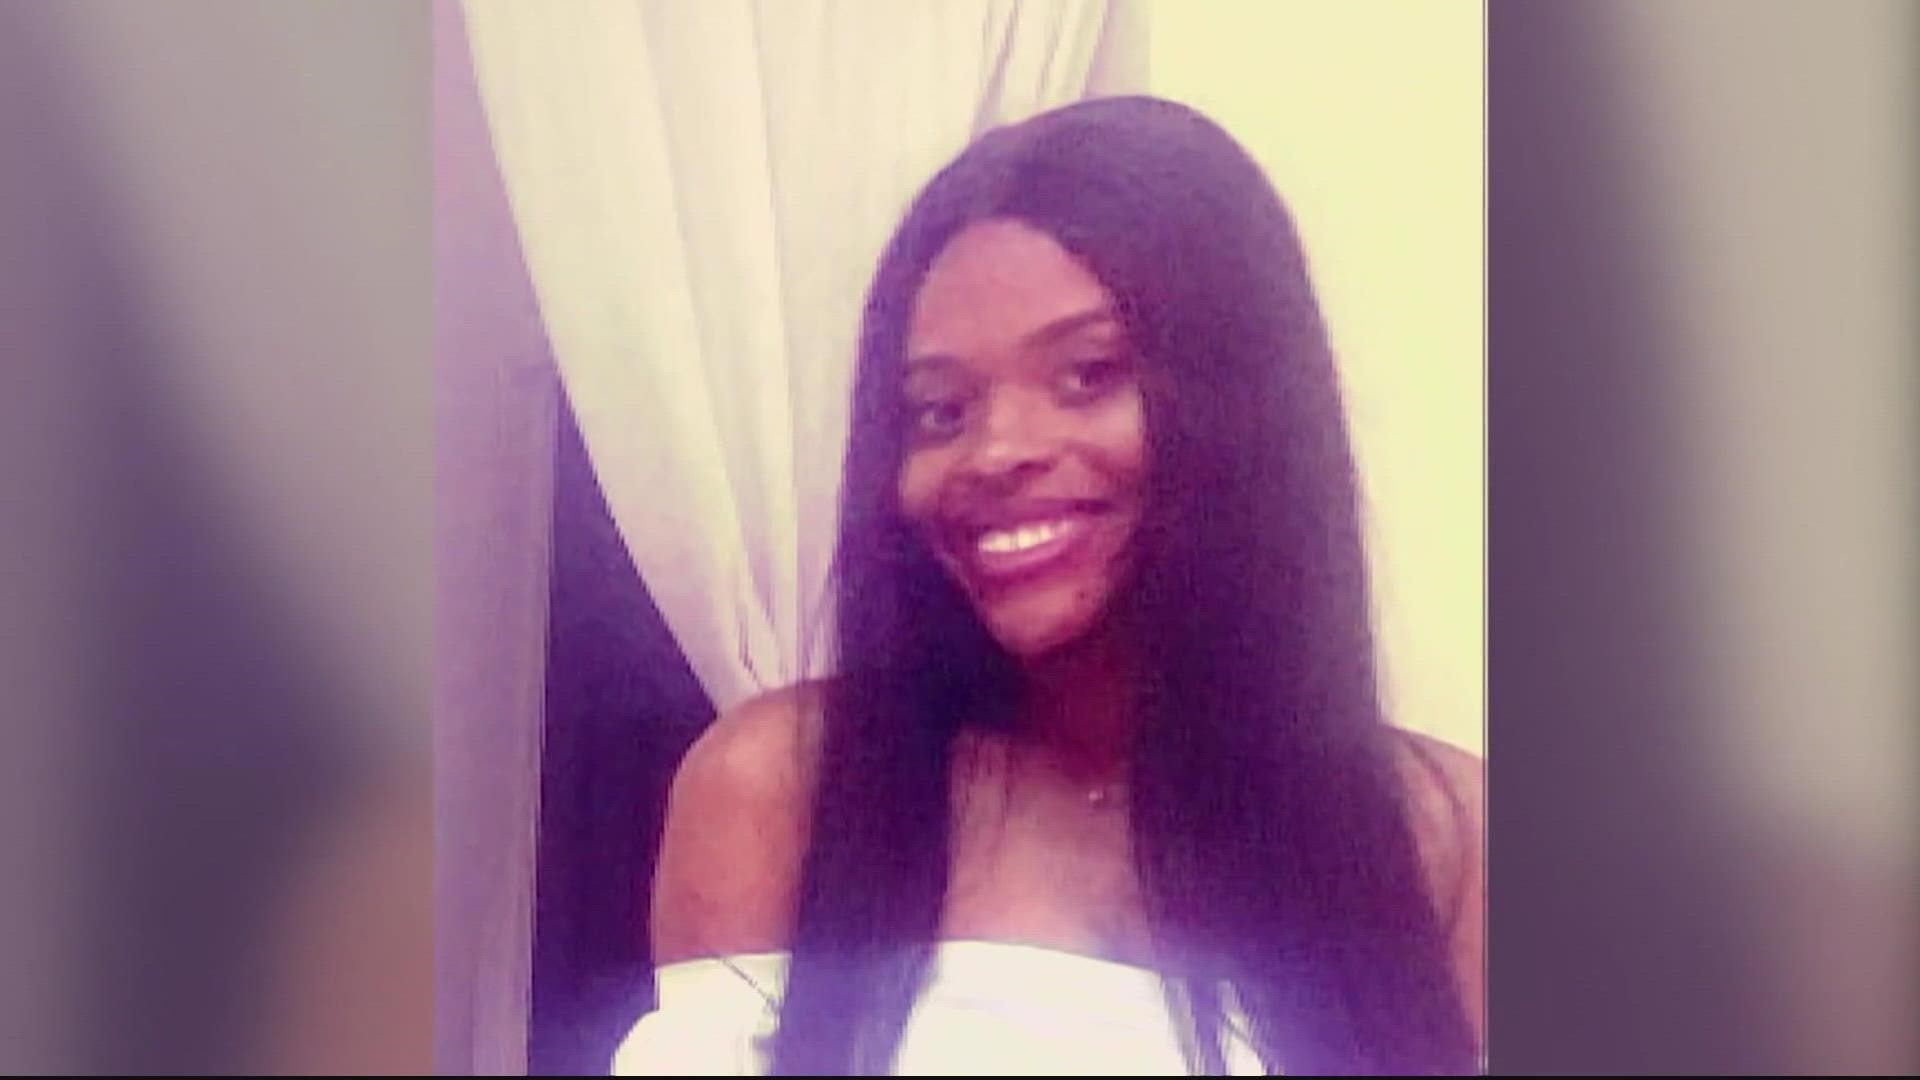 TiJae Baker has been missing since May 1 and was recently sighted in Lanham, Maryland at a nail salon on June 1.